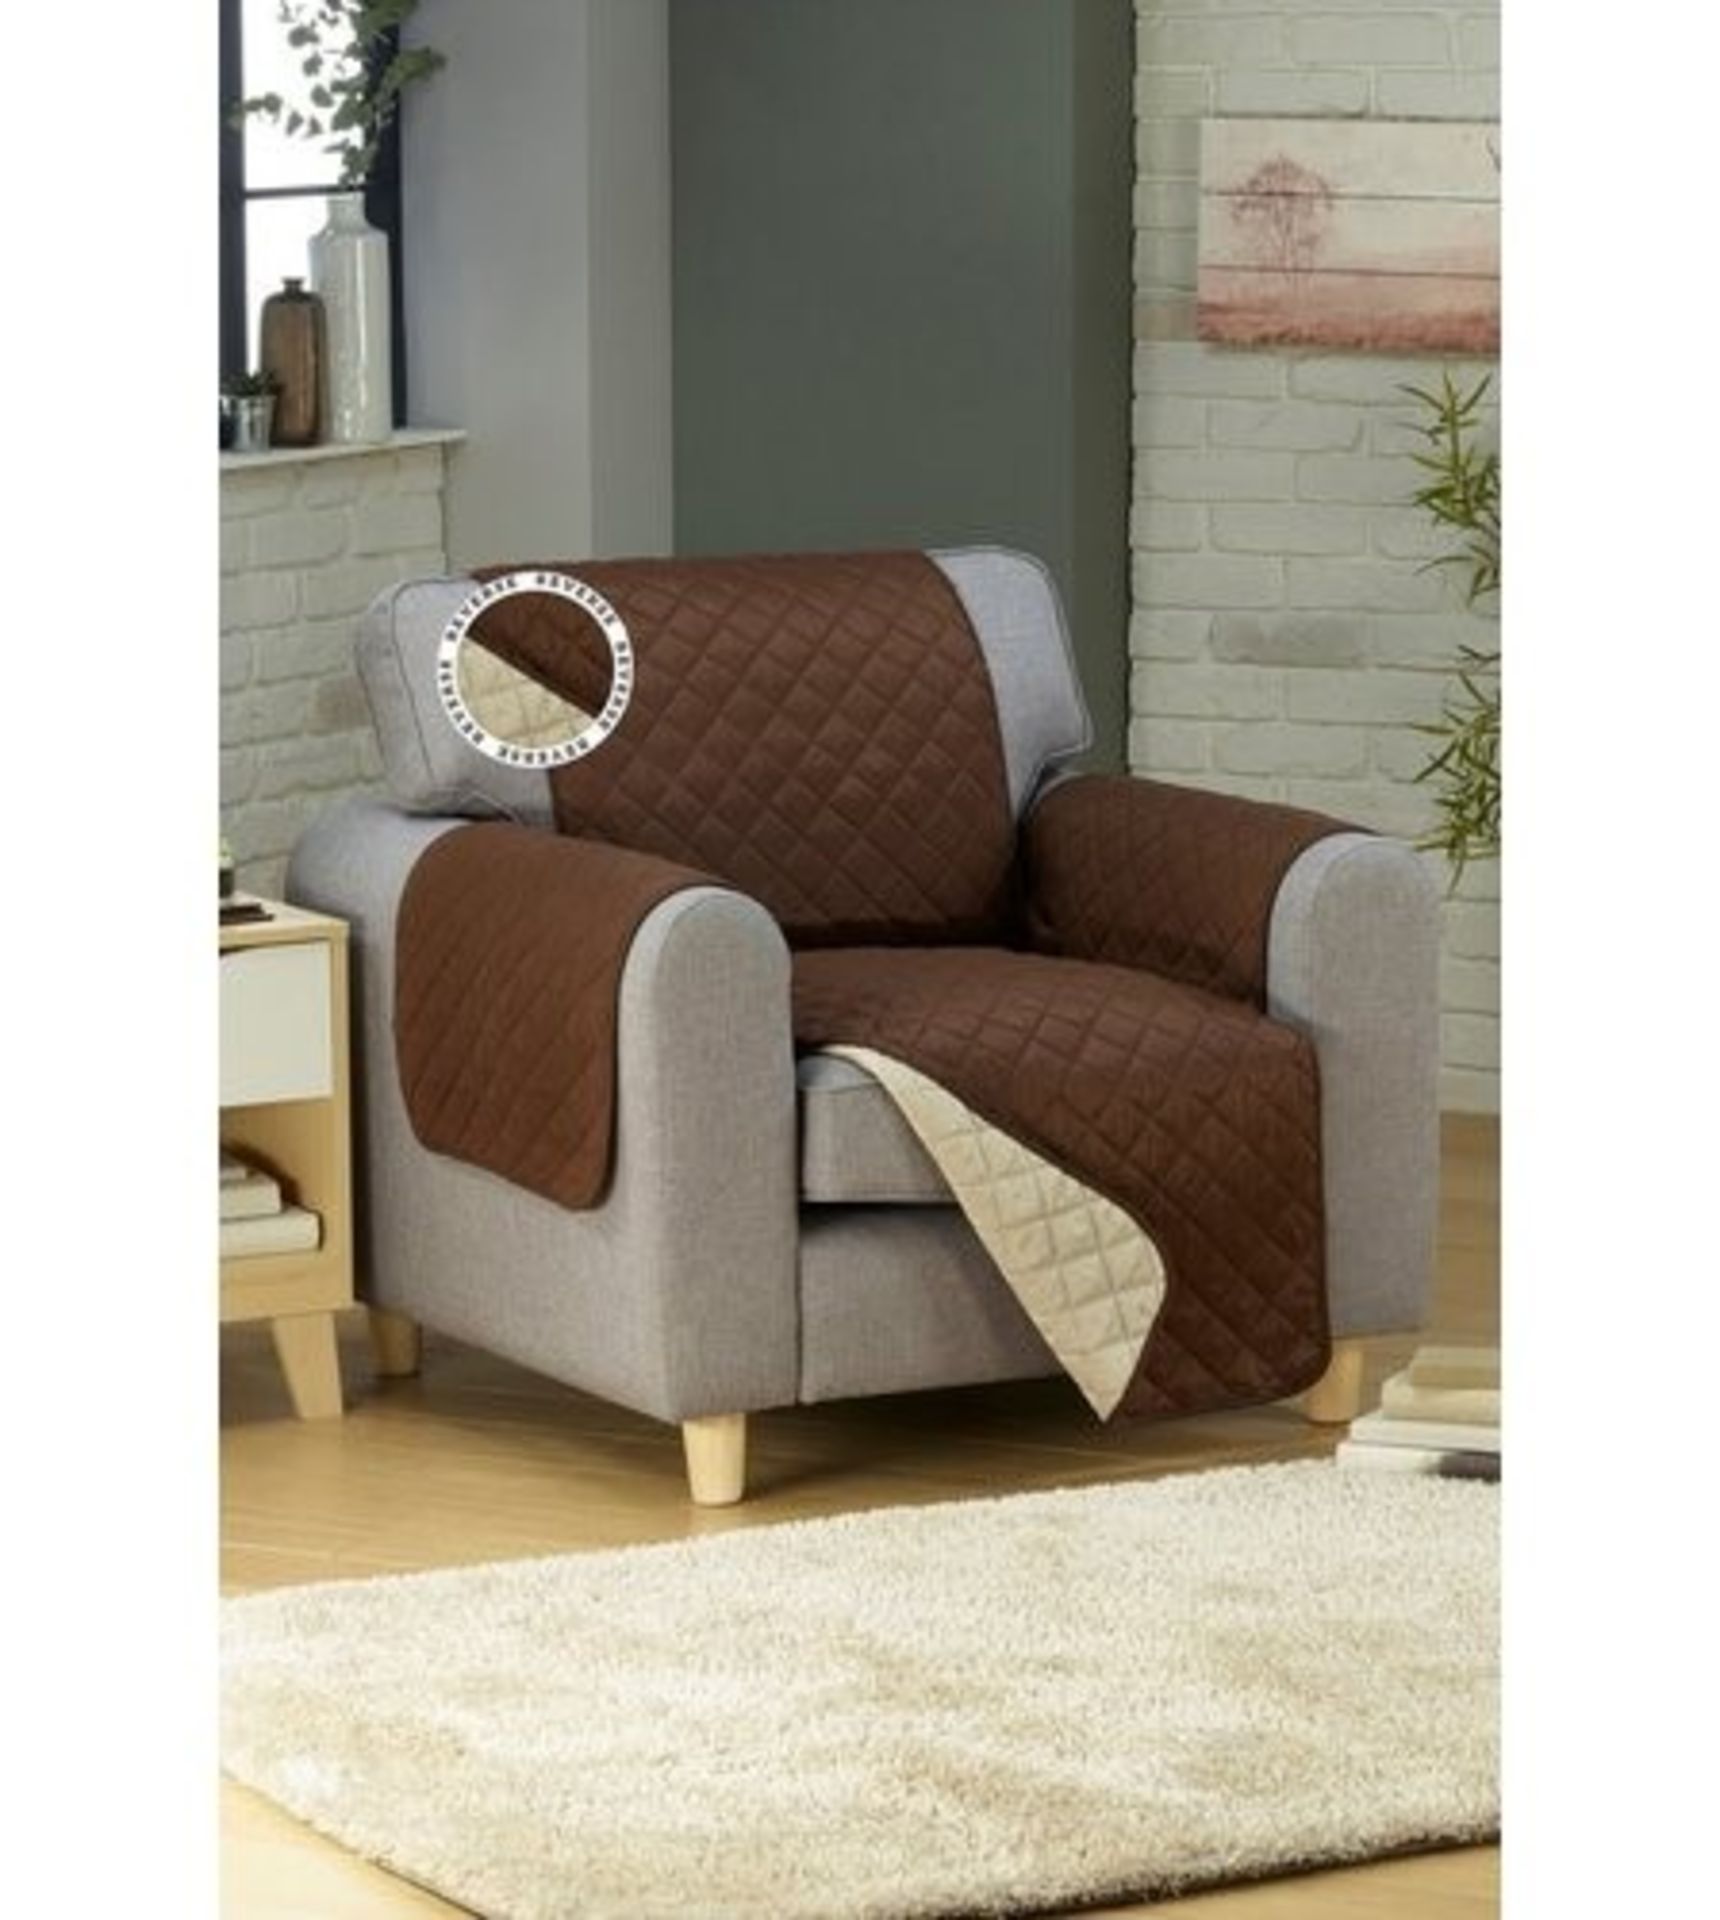 1 PACKAGED REVERSIBLE FURNITURE PROTECTOR IN BROWN AND BEIGE (VIEWING HIGHLY RECOMMENDED)